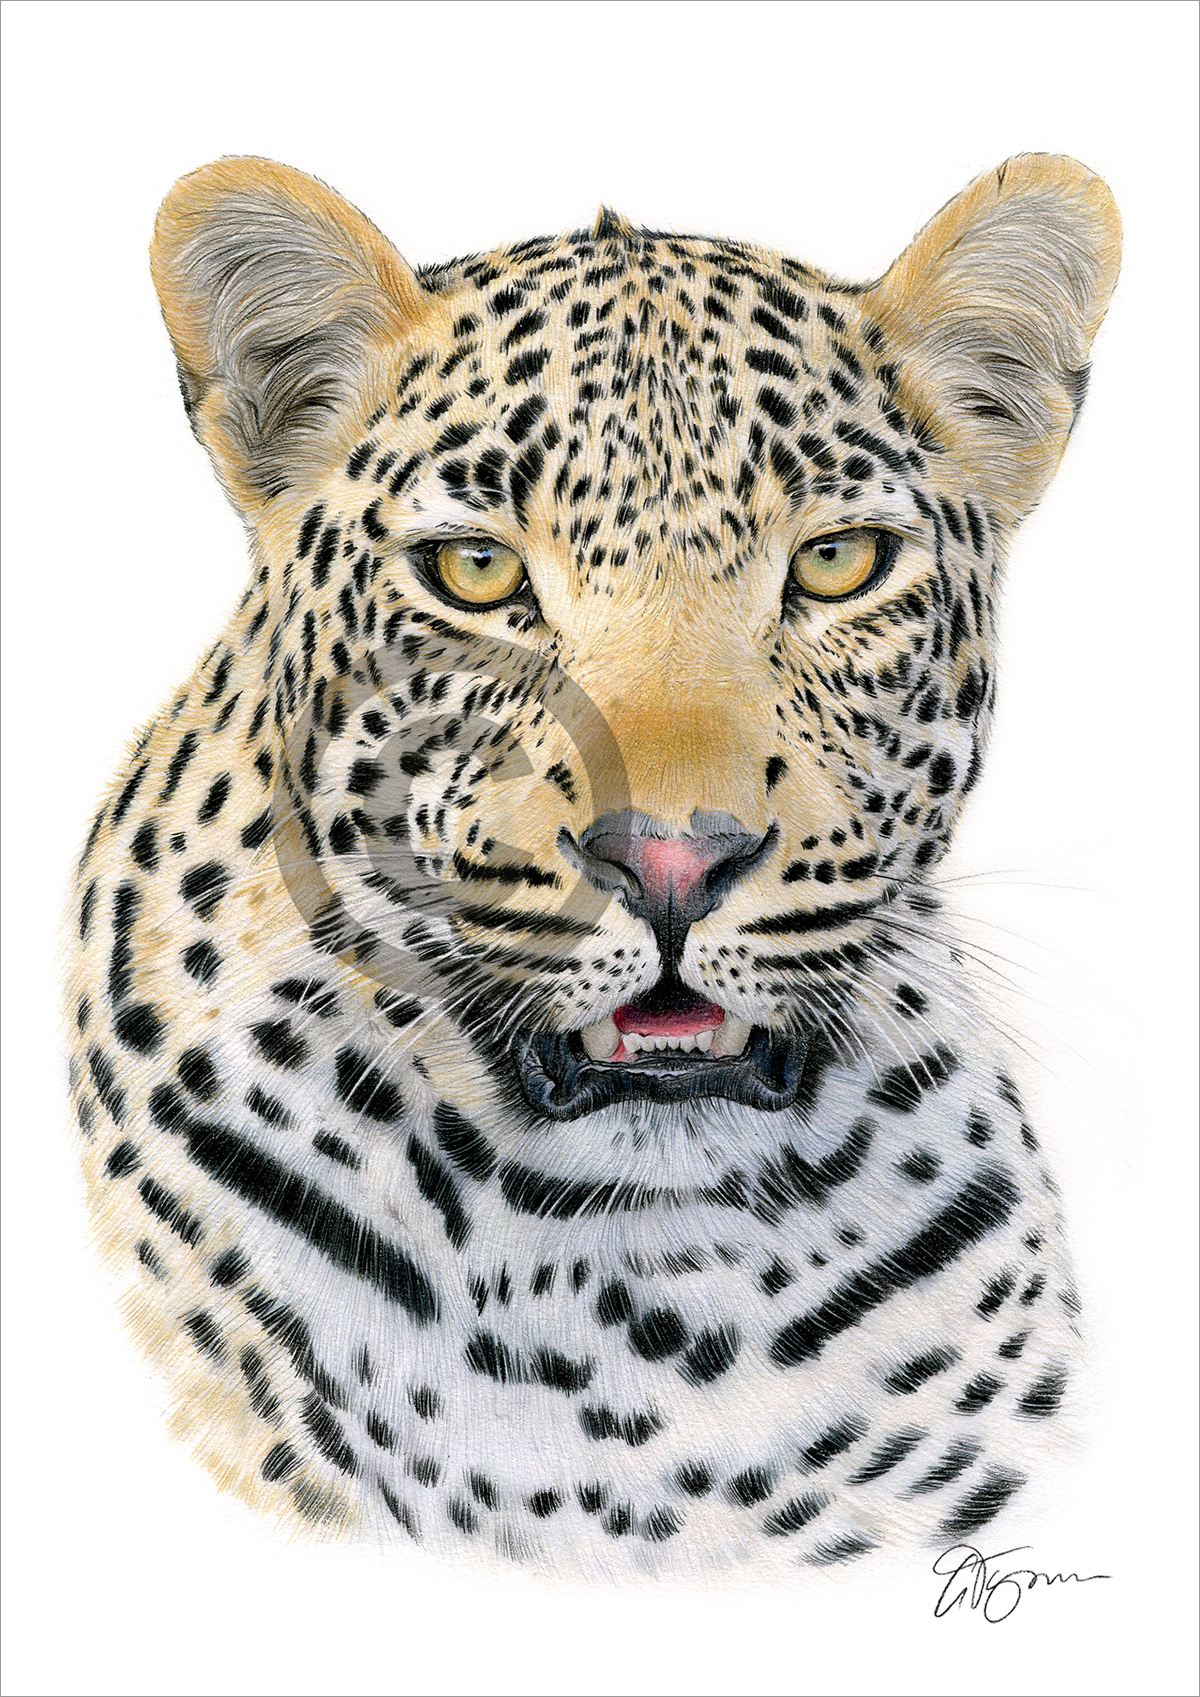 Colour pencil drawing of a leopard by artist Gary Tymon